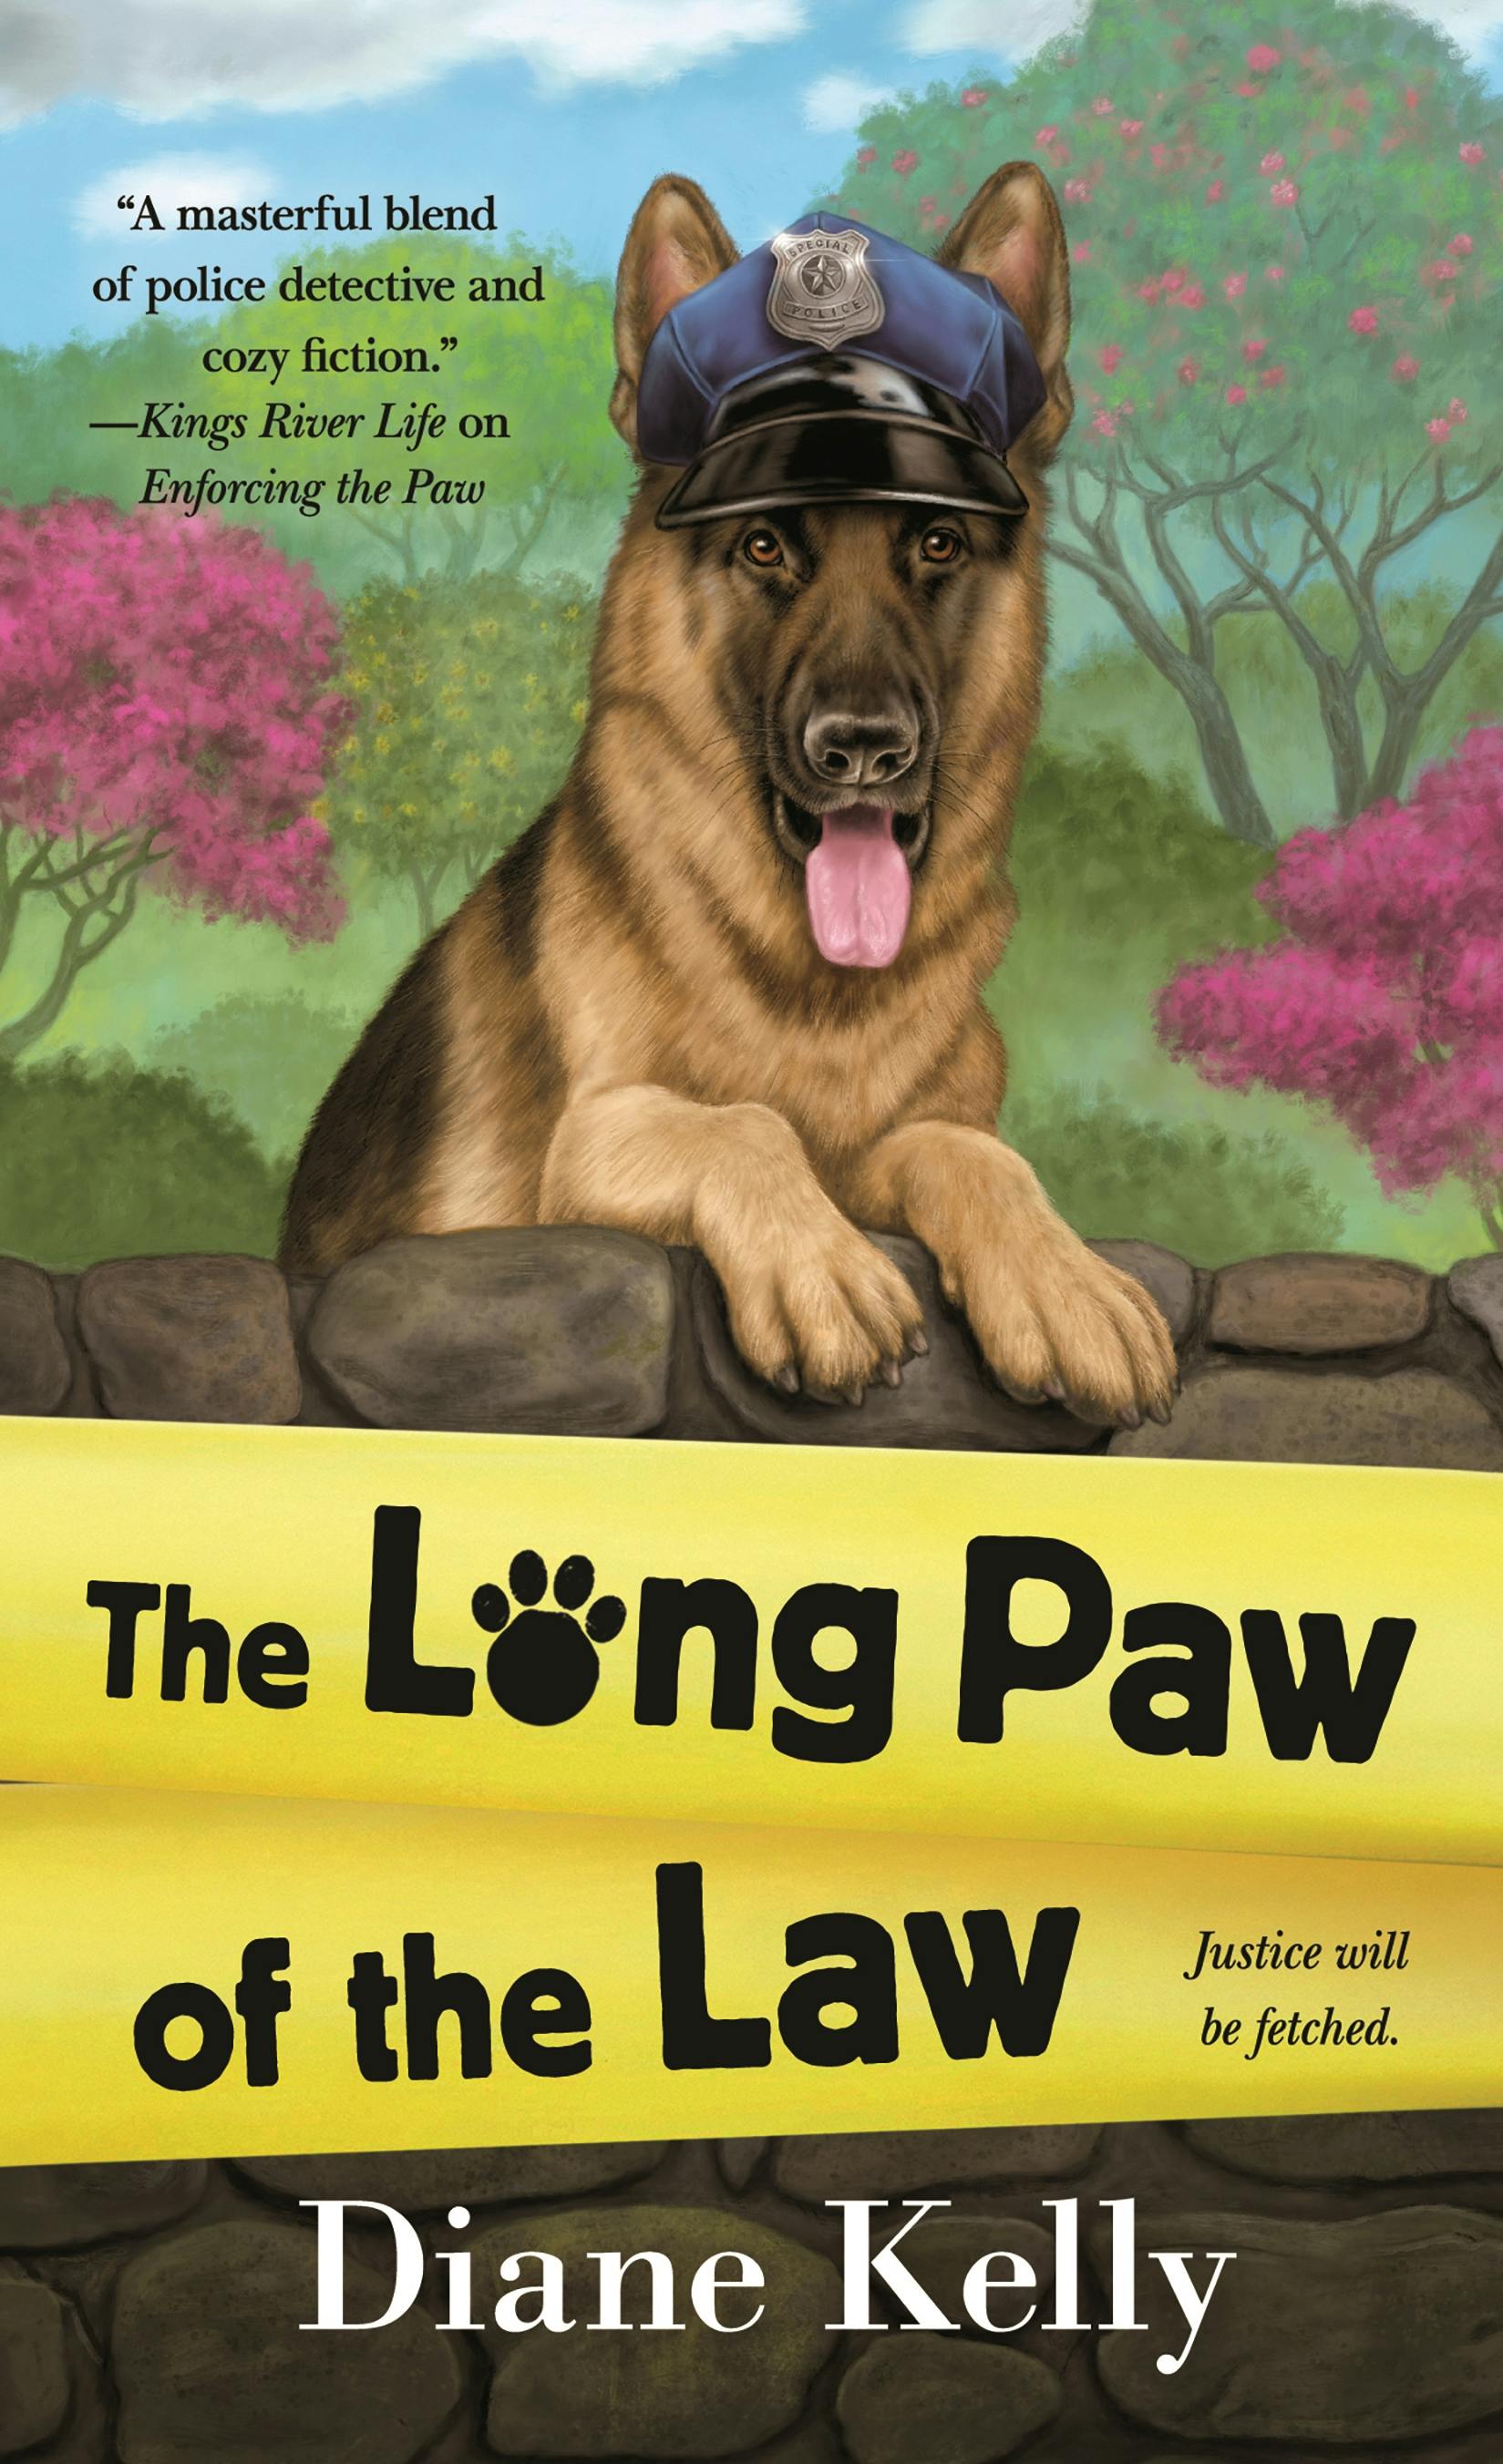 The Long Paw of the Law